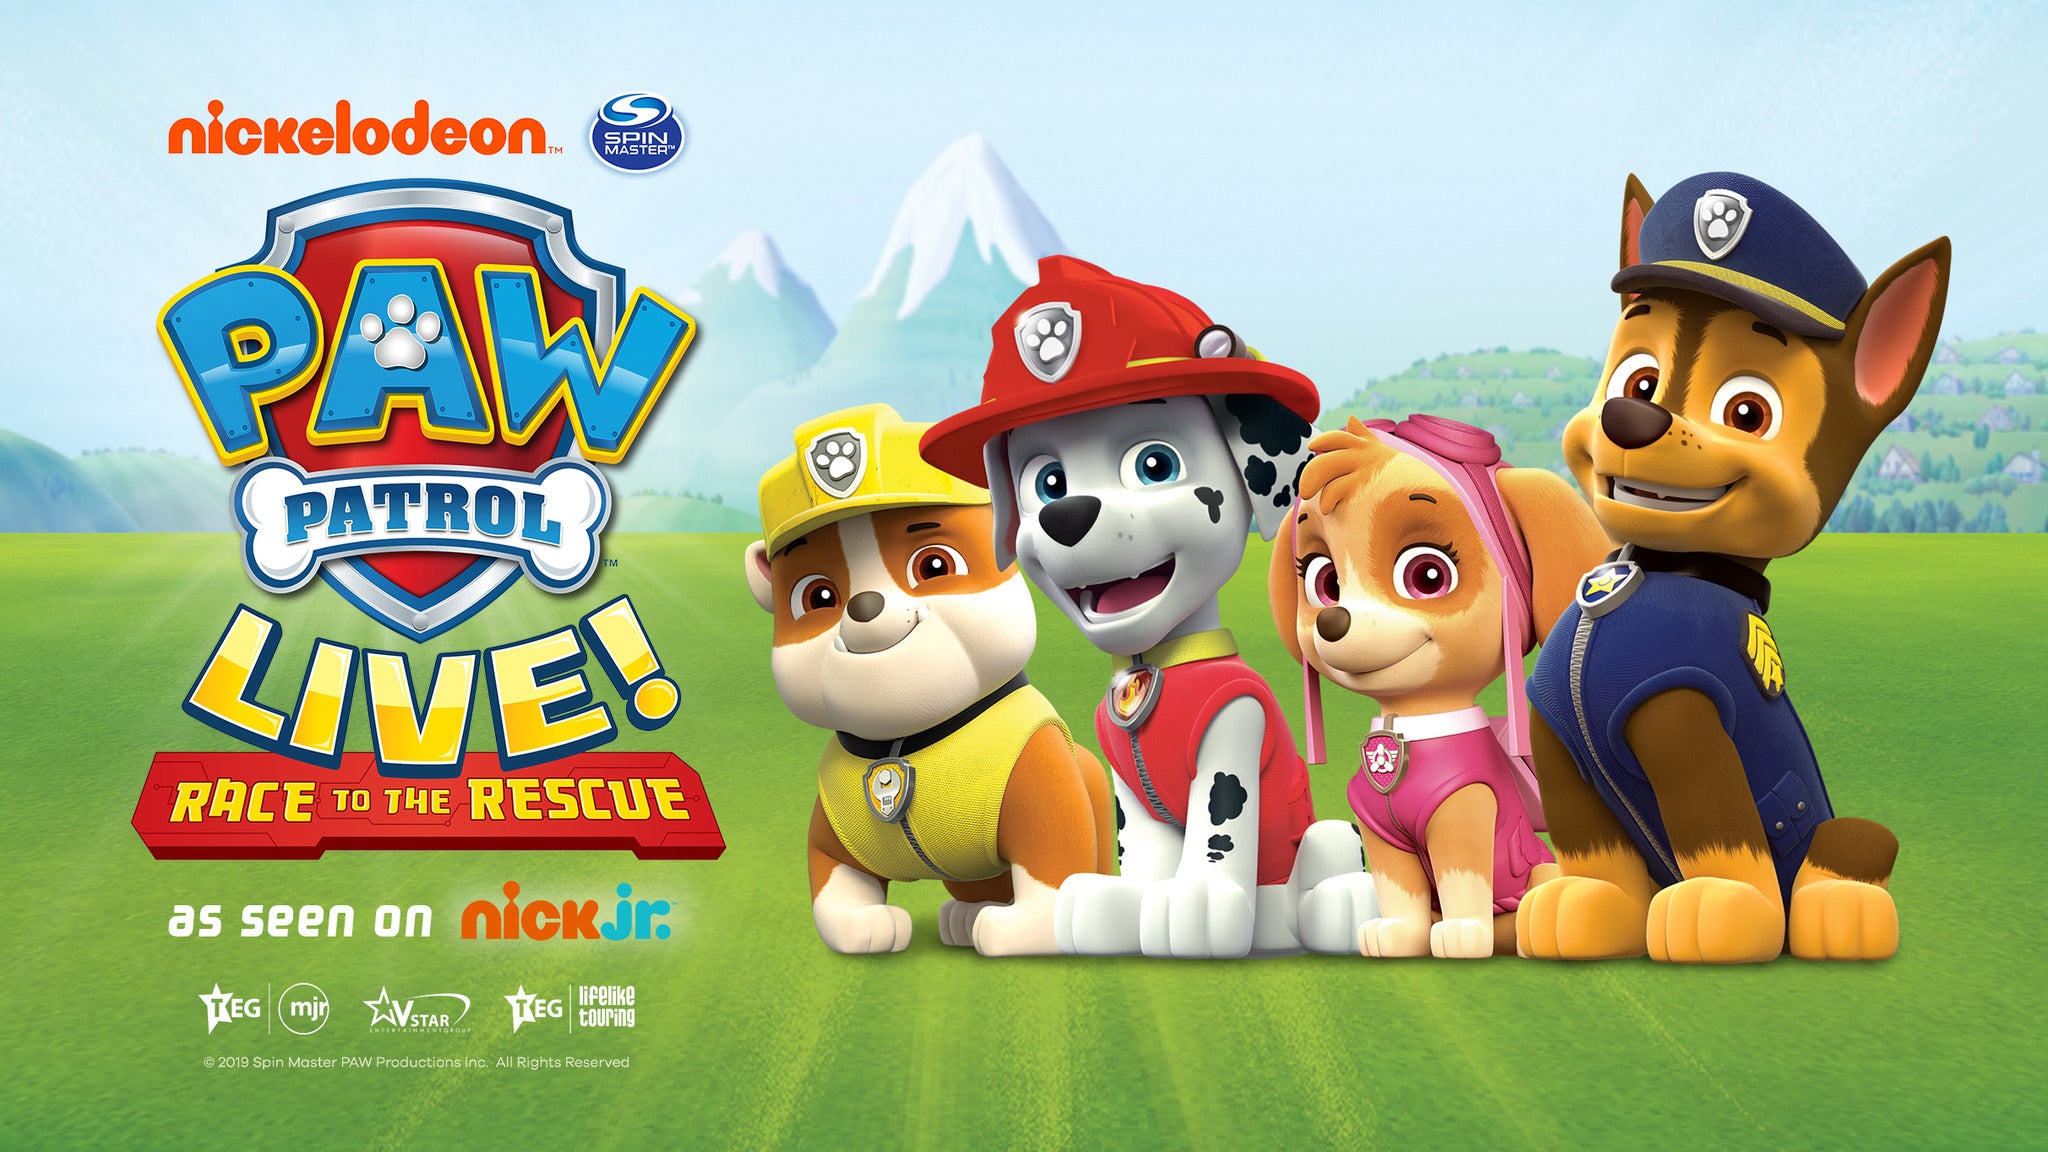 PAW Patrol Live!: Race To the Rescue Event Title Pic